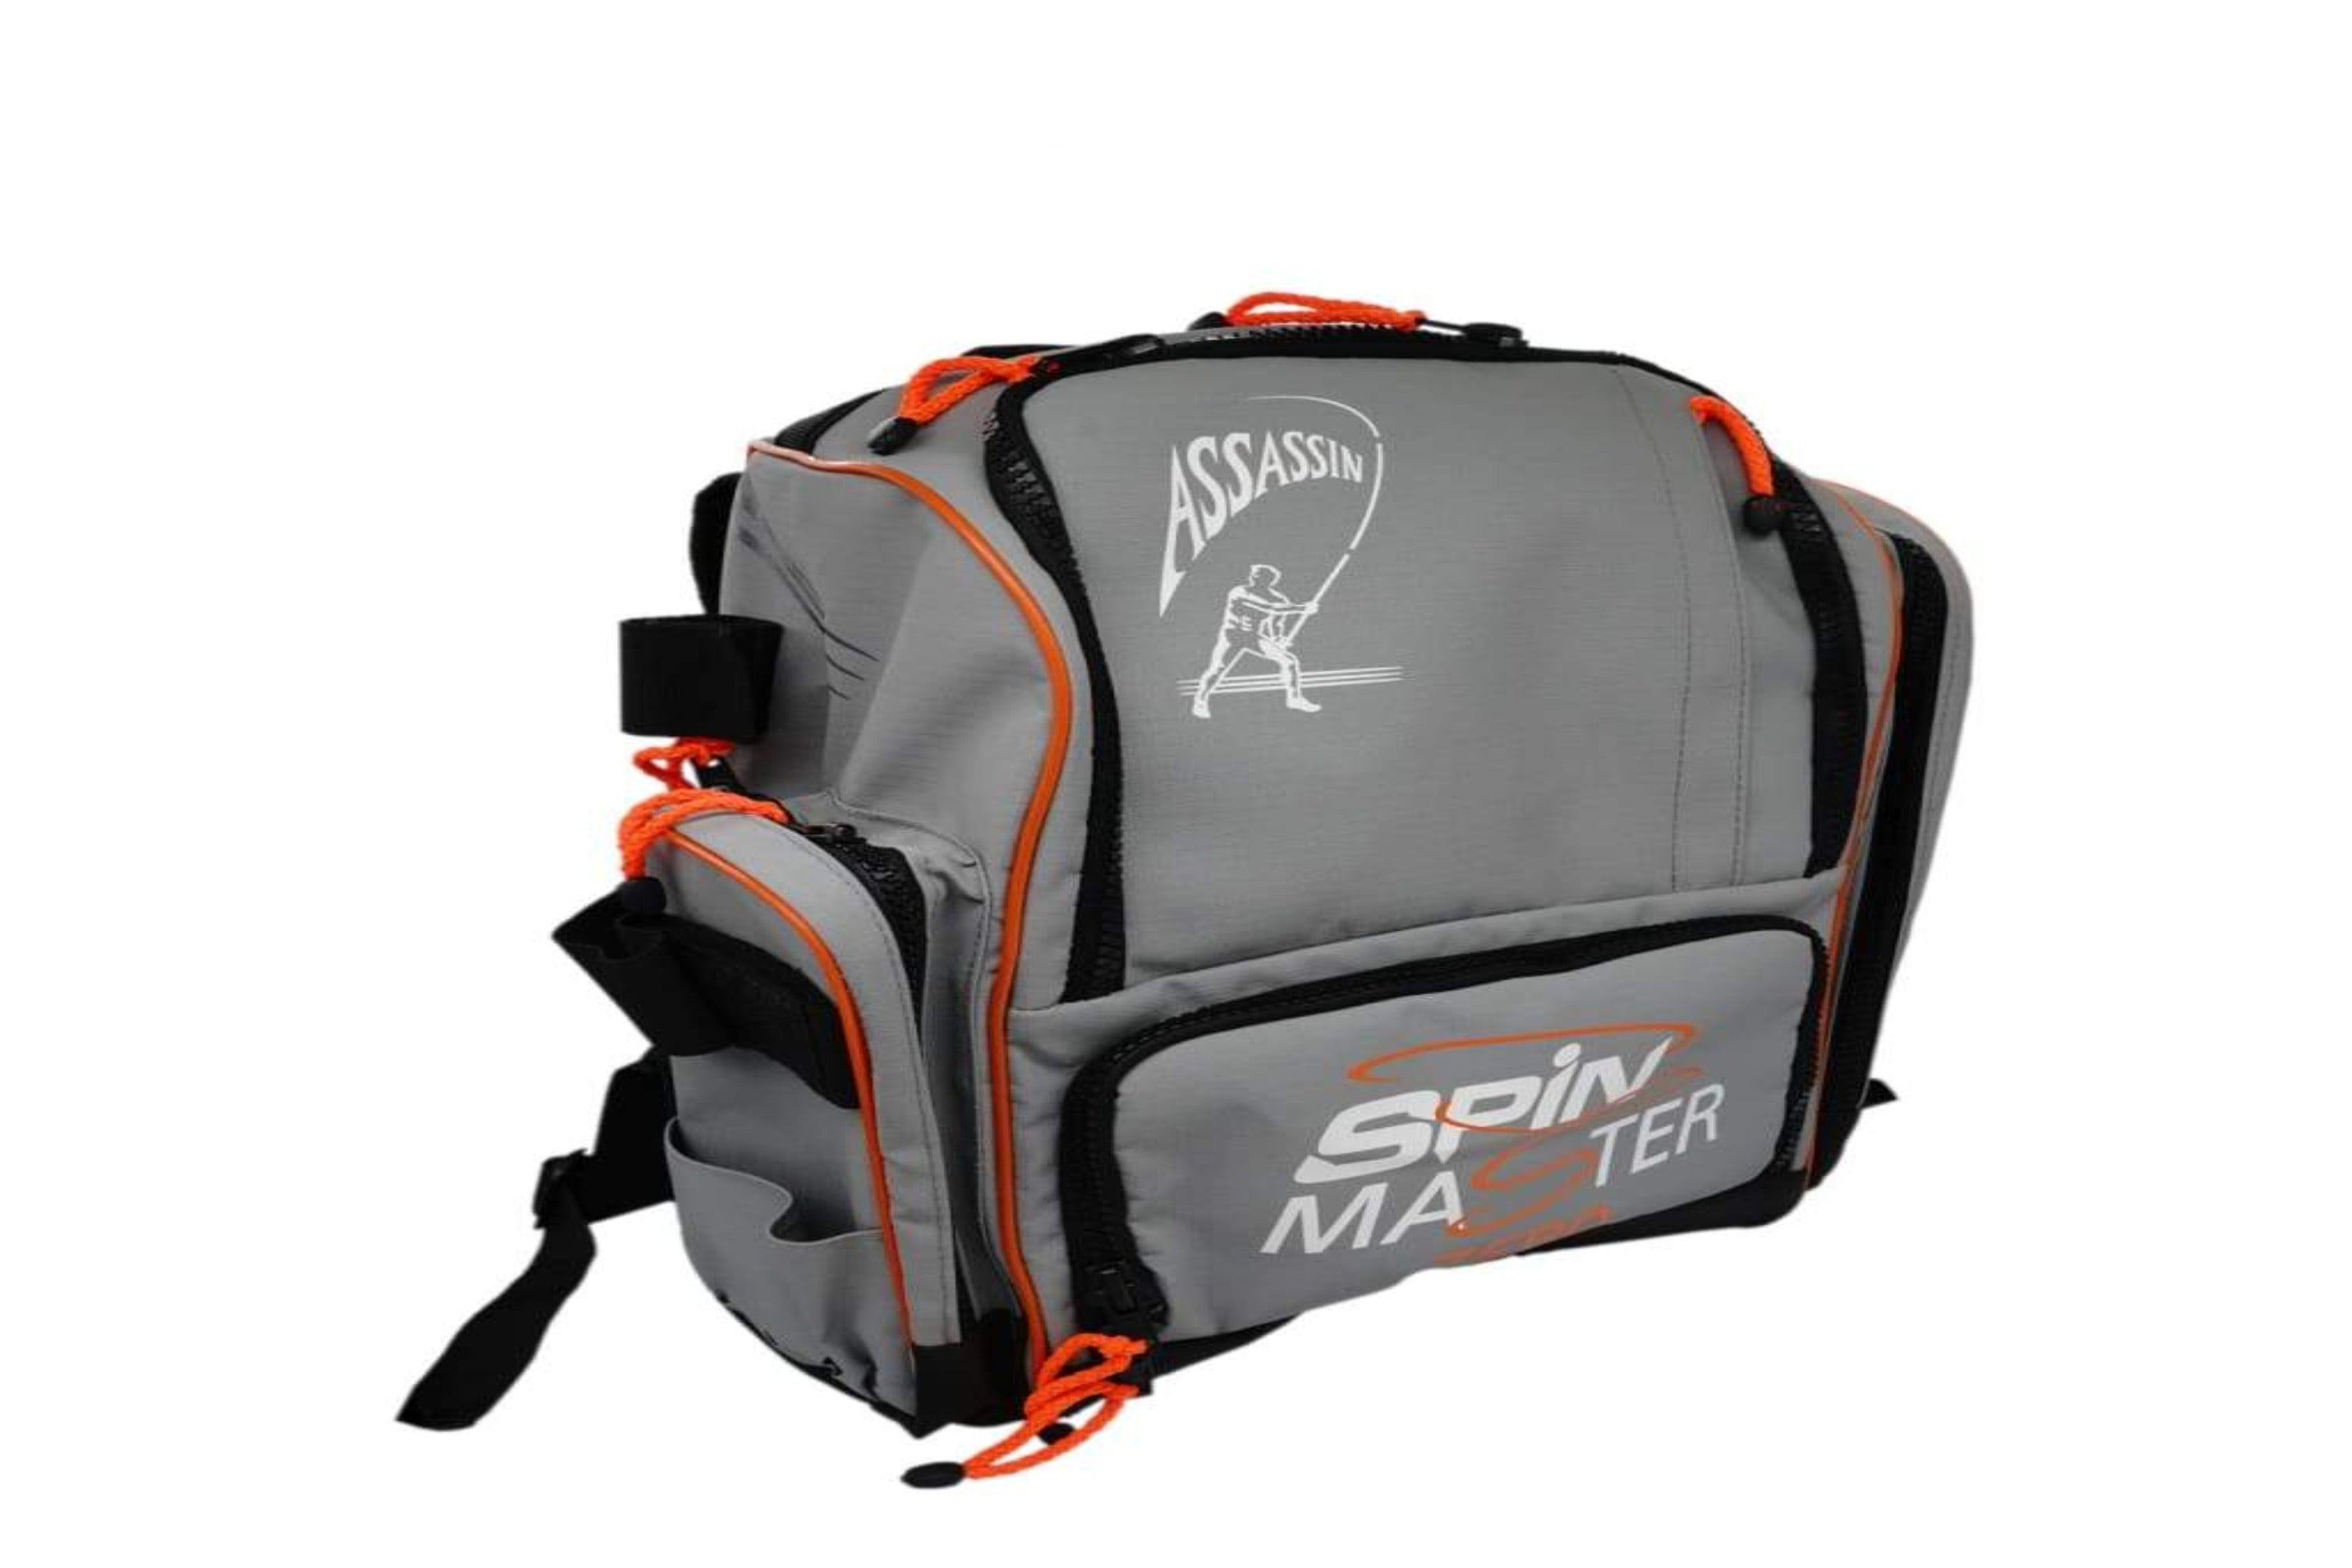 Assassin Spin Master Zero Bag - The Fishing Specialist